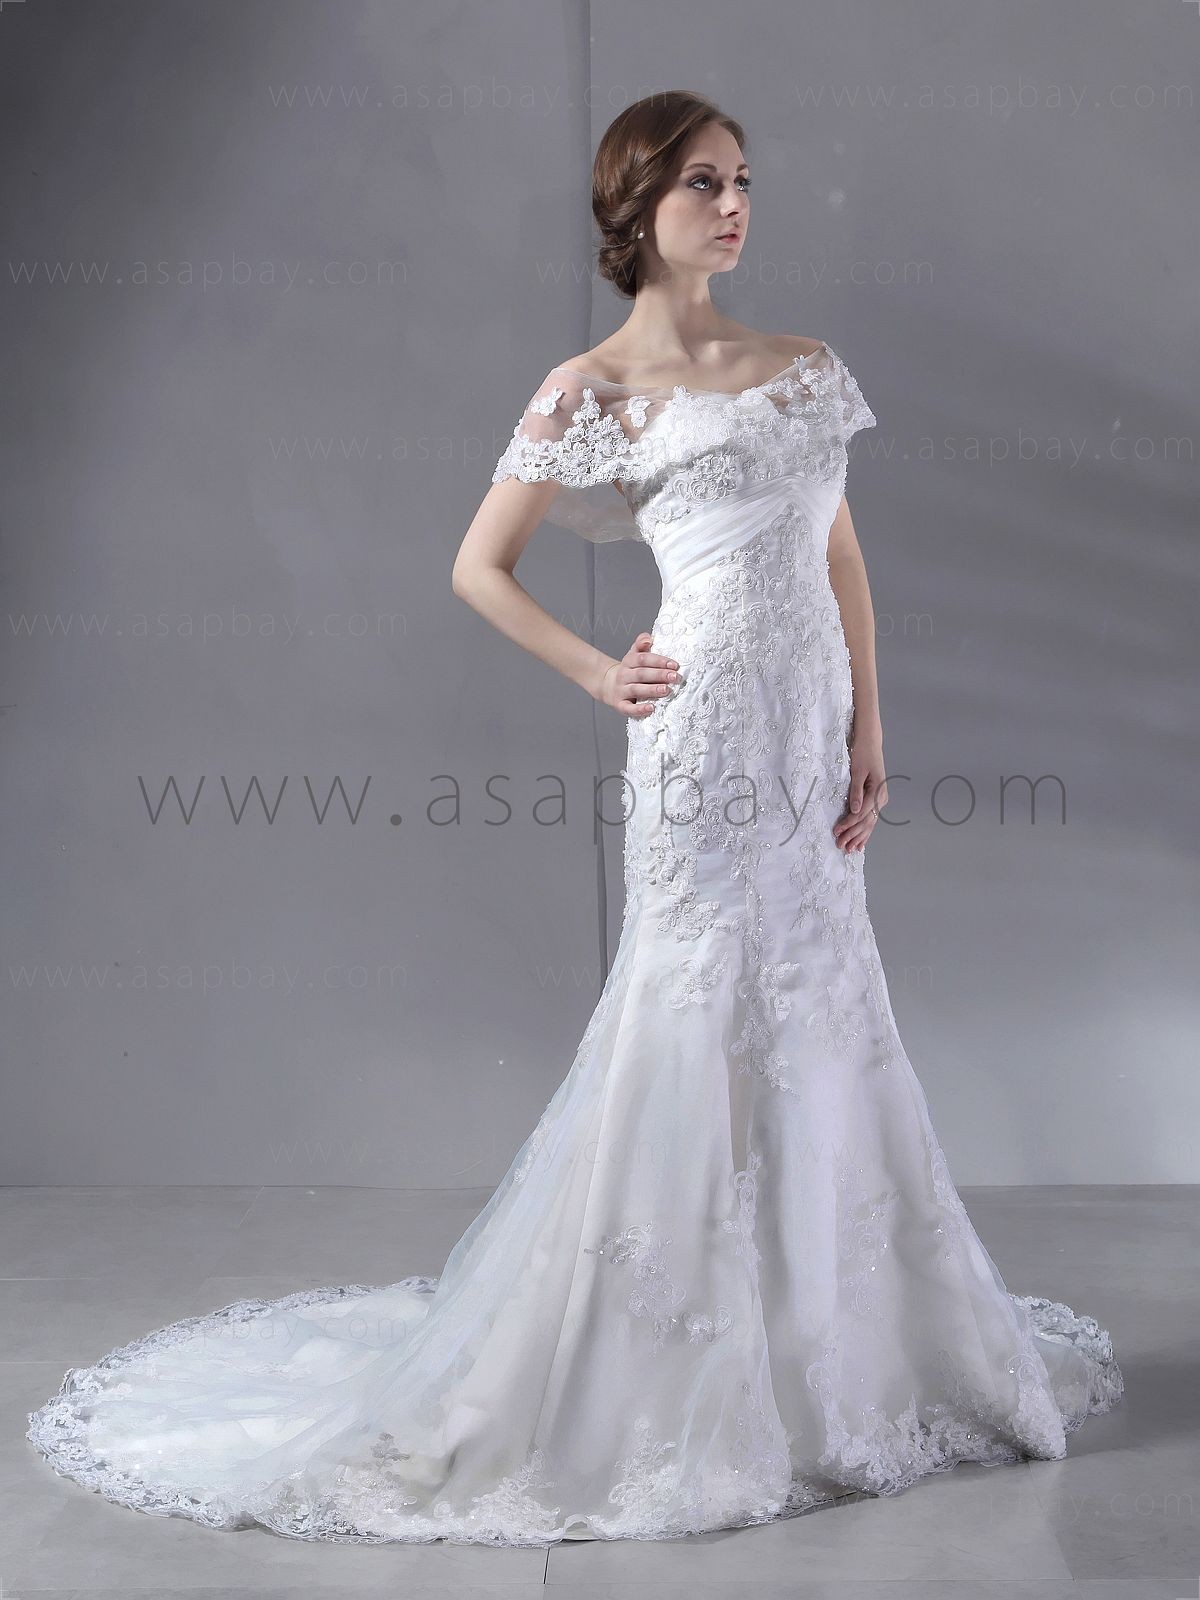 strapless lace wedding dresses Posted by honey sing at 00:03